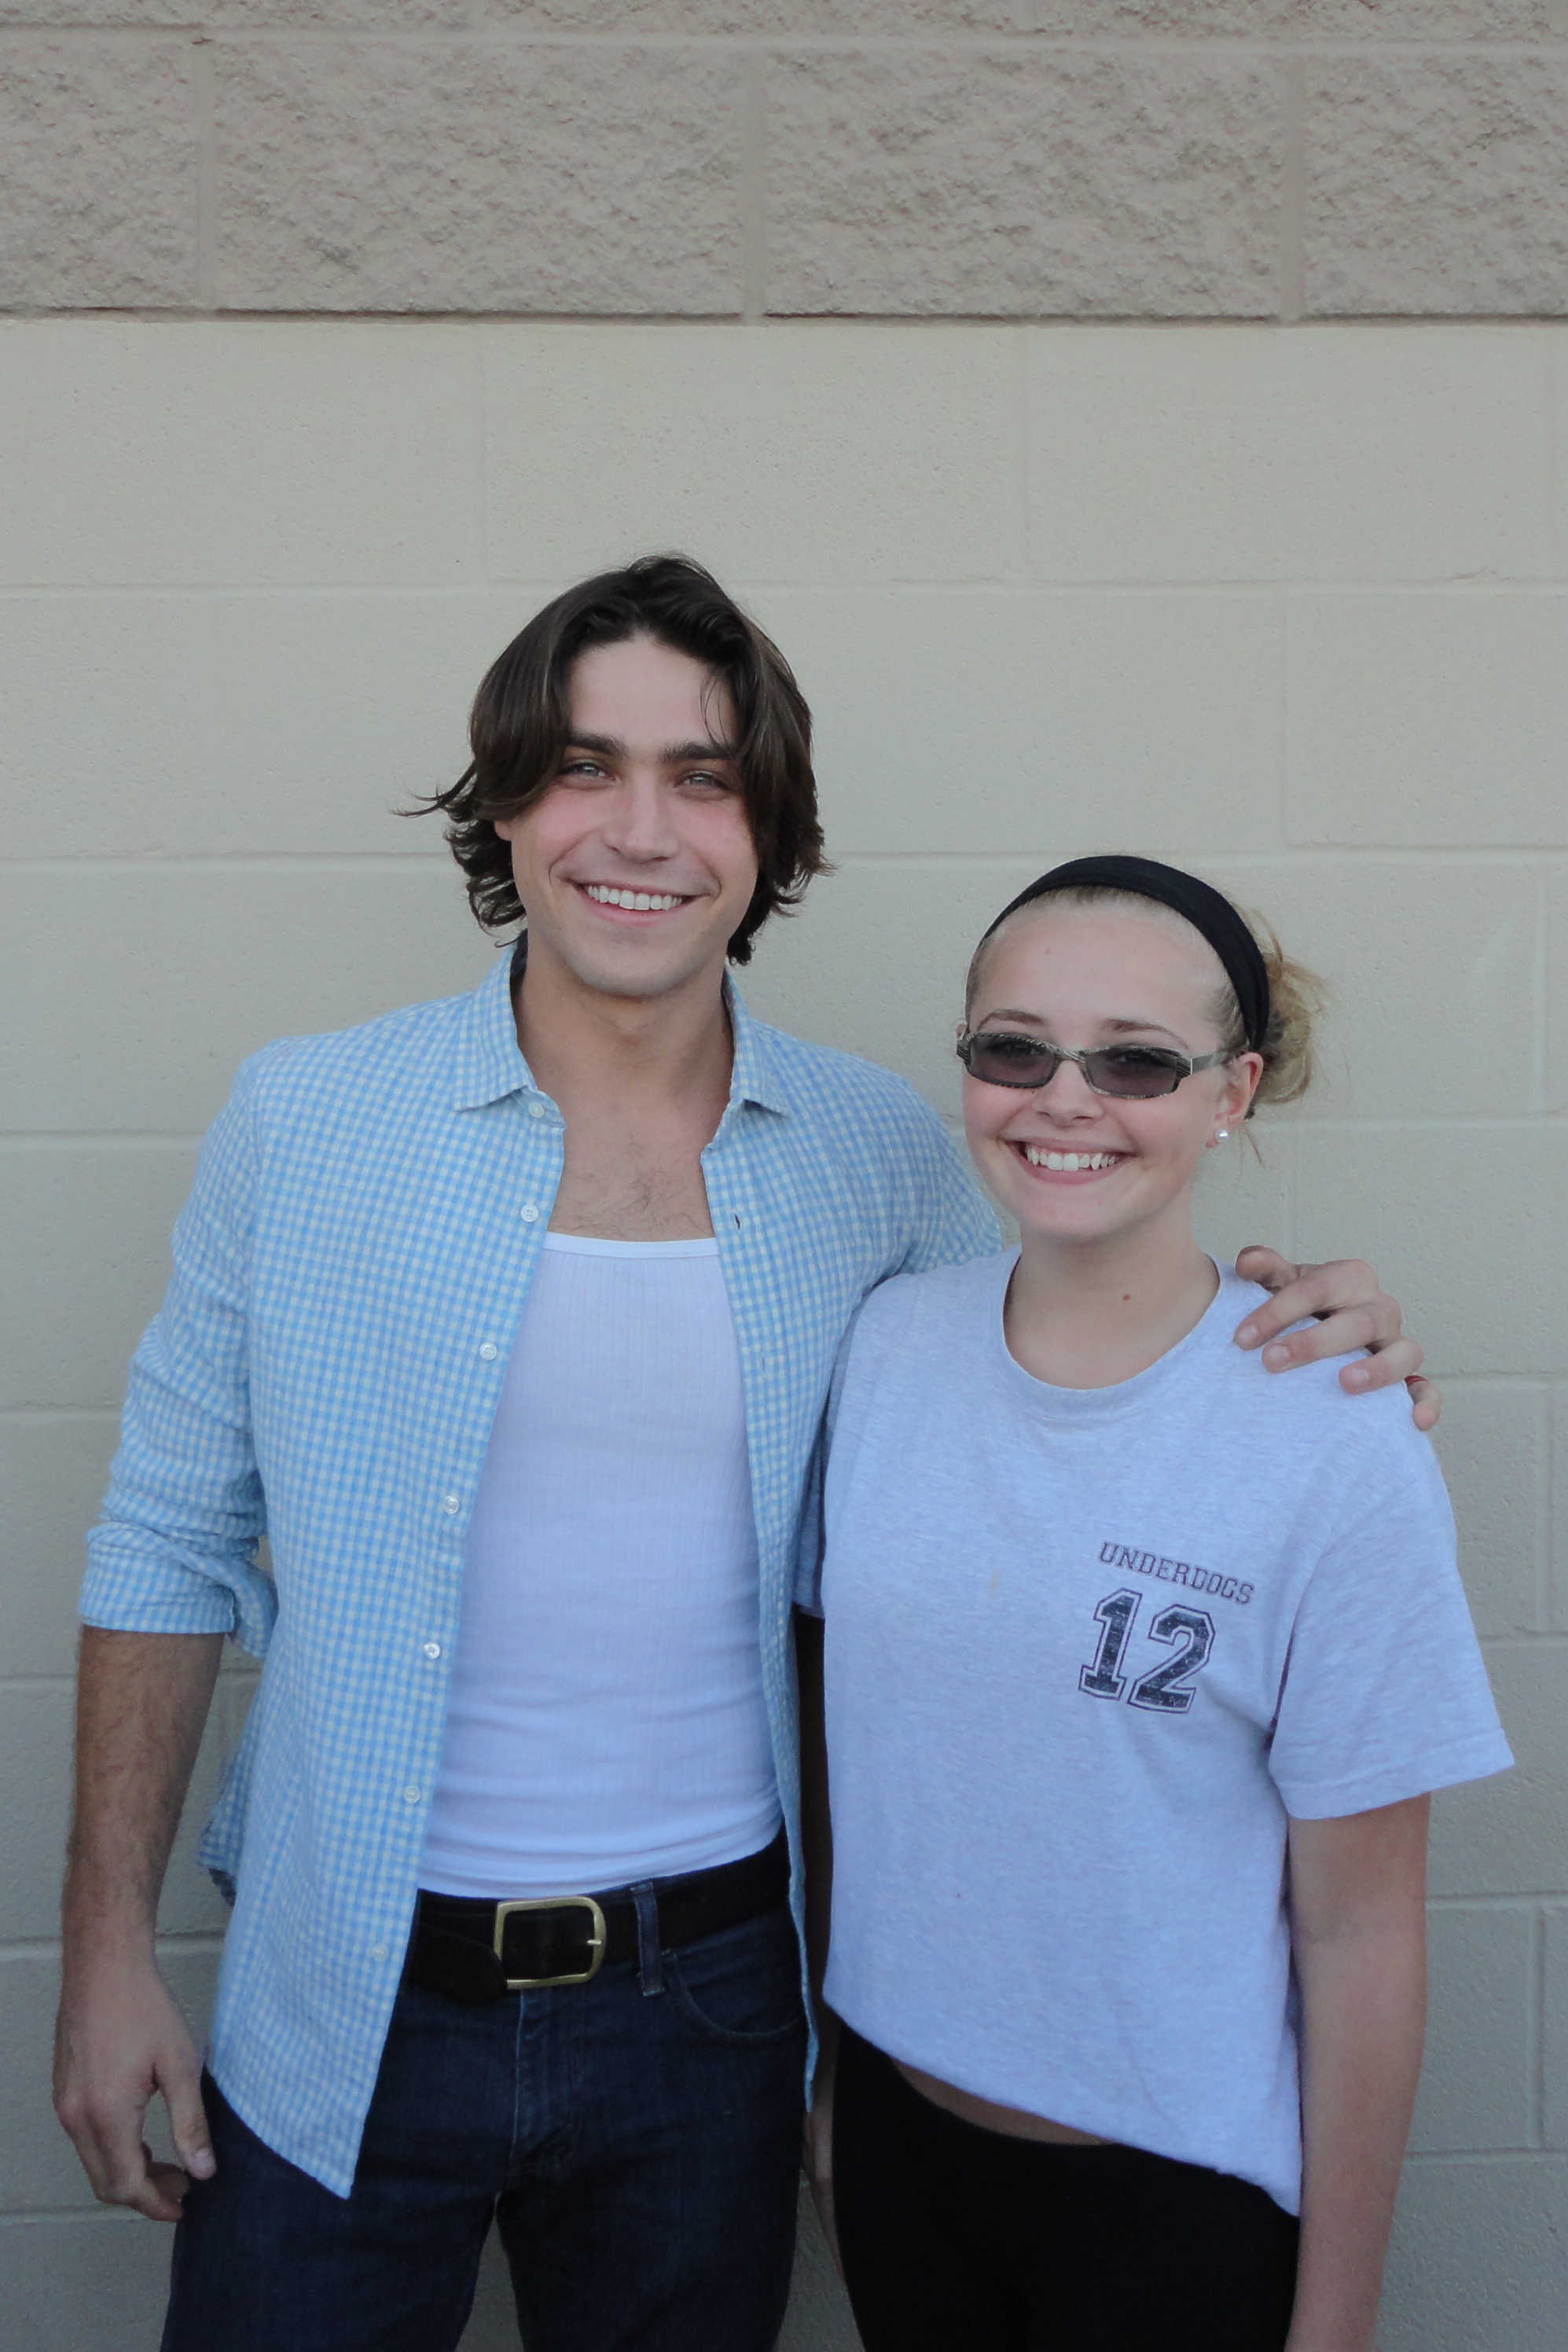 Posing with Logan Huffman at the Underdogs premier event held in Canton, Ohio.